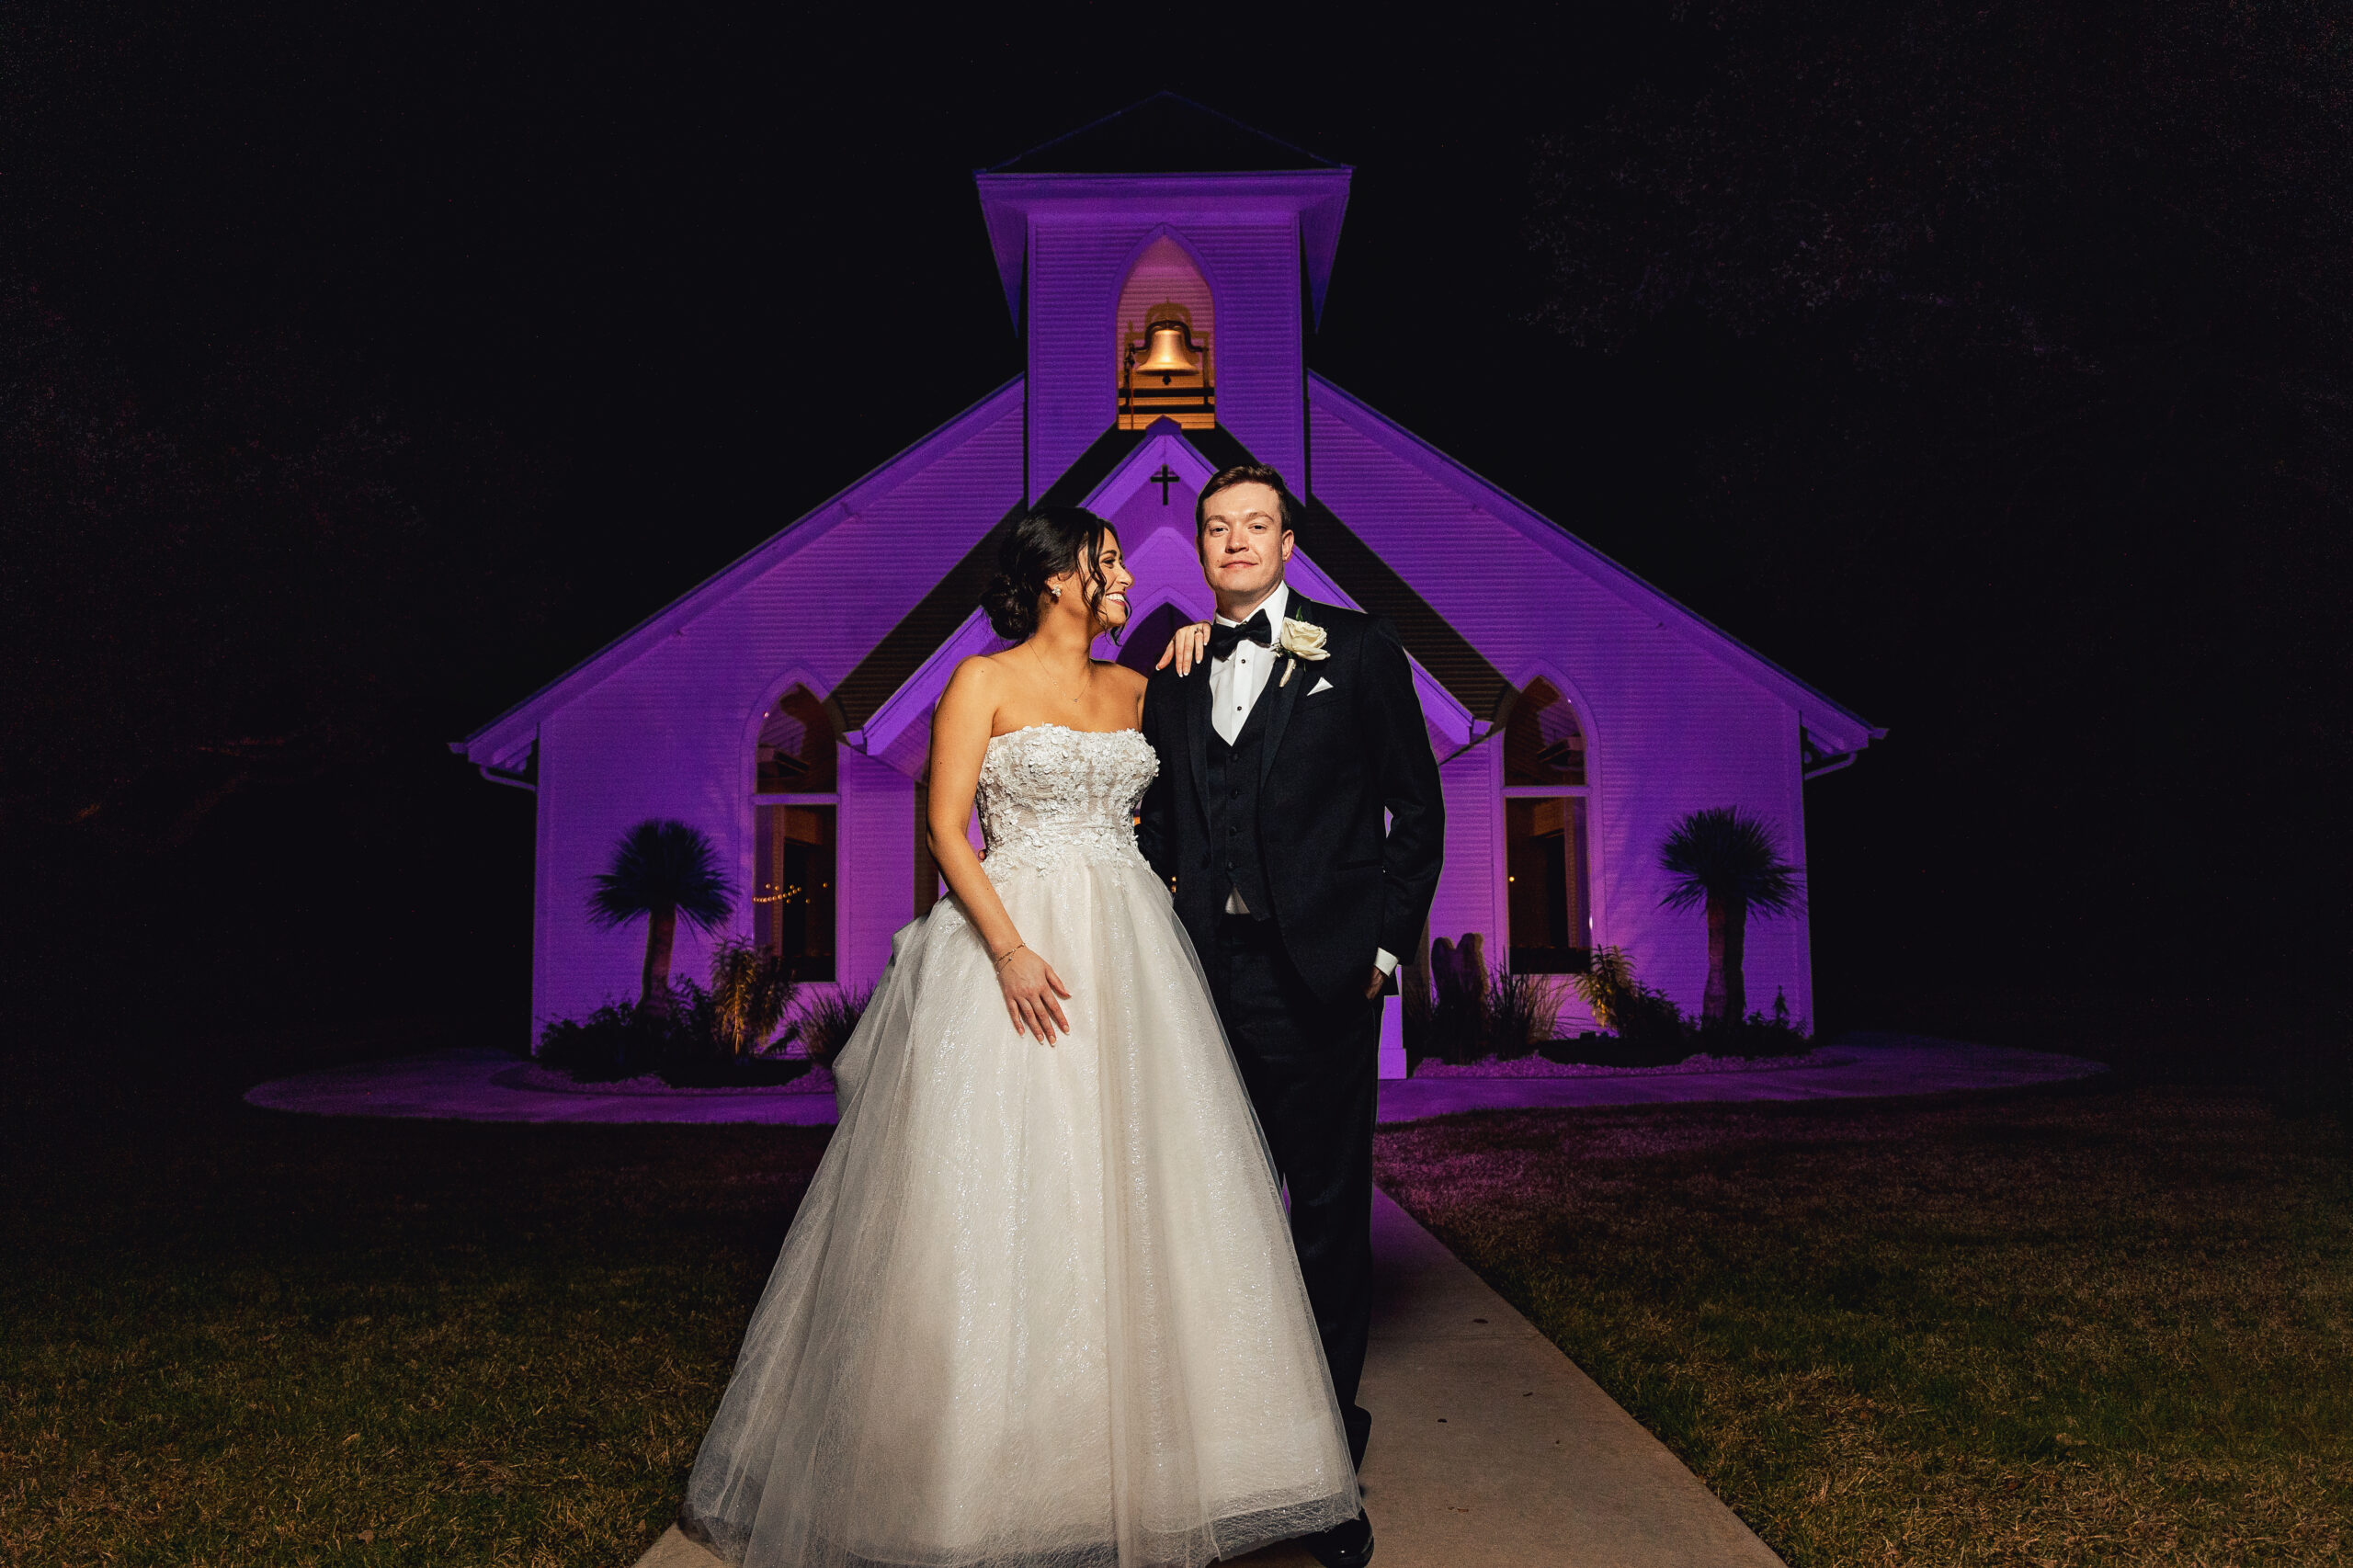 naturally beautiful bride gazes lovingly at her groom during their relaxed portrait session in front Chandelier at Gruene's outdoor chapel after dark